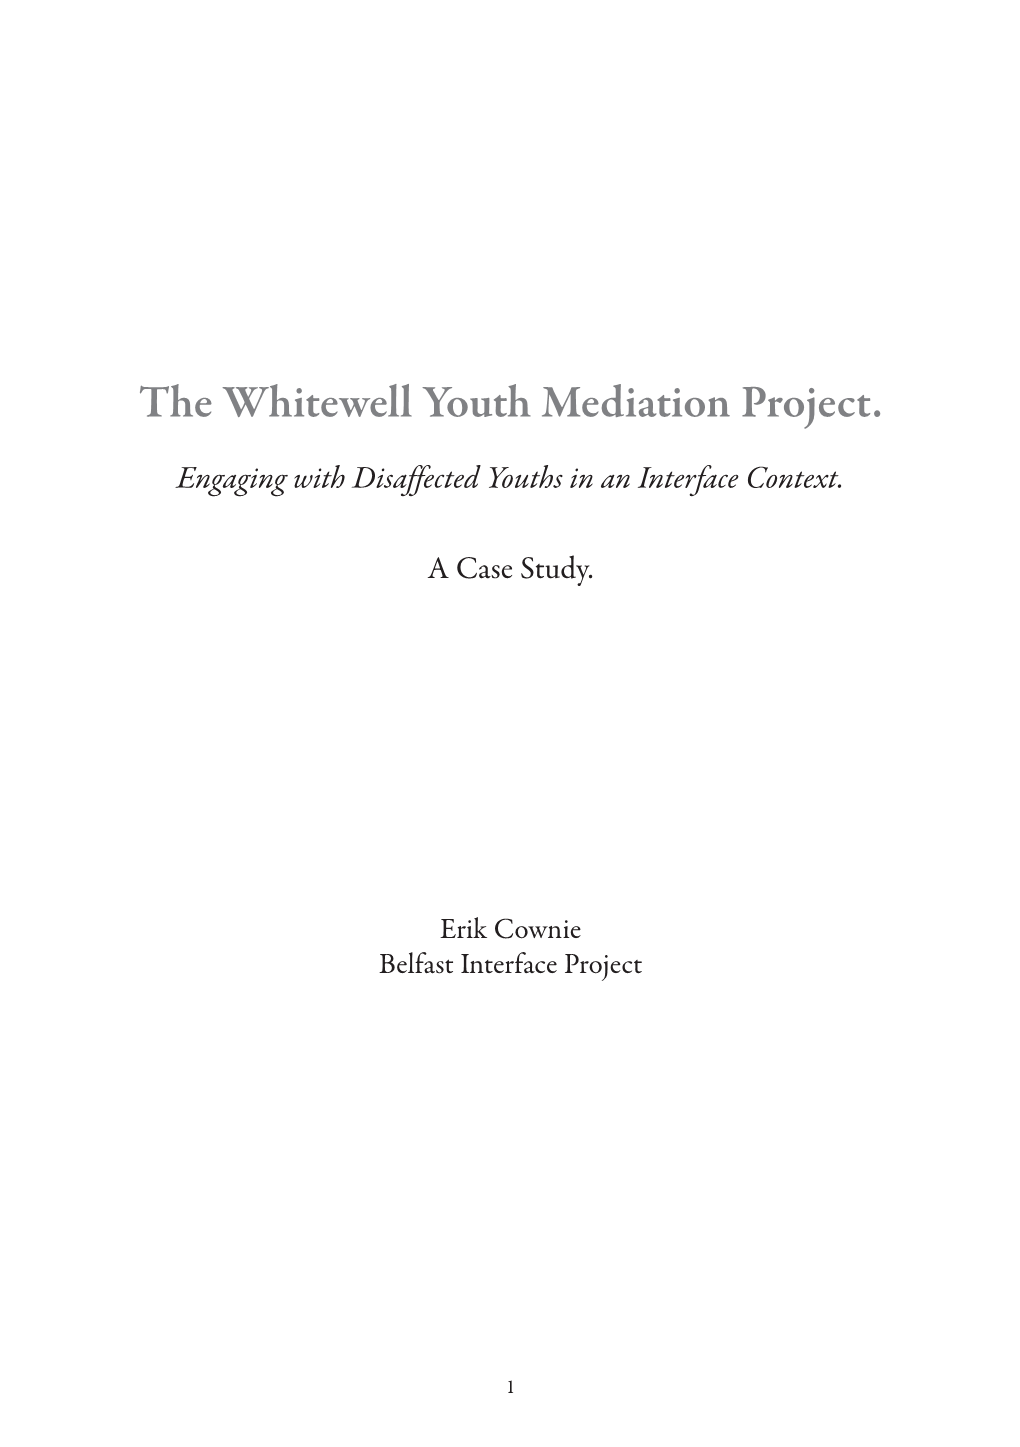 The Whitewell Youth Mediation Project (2008)